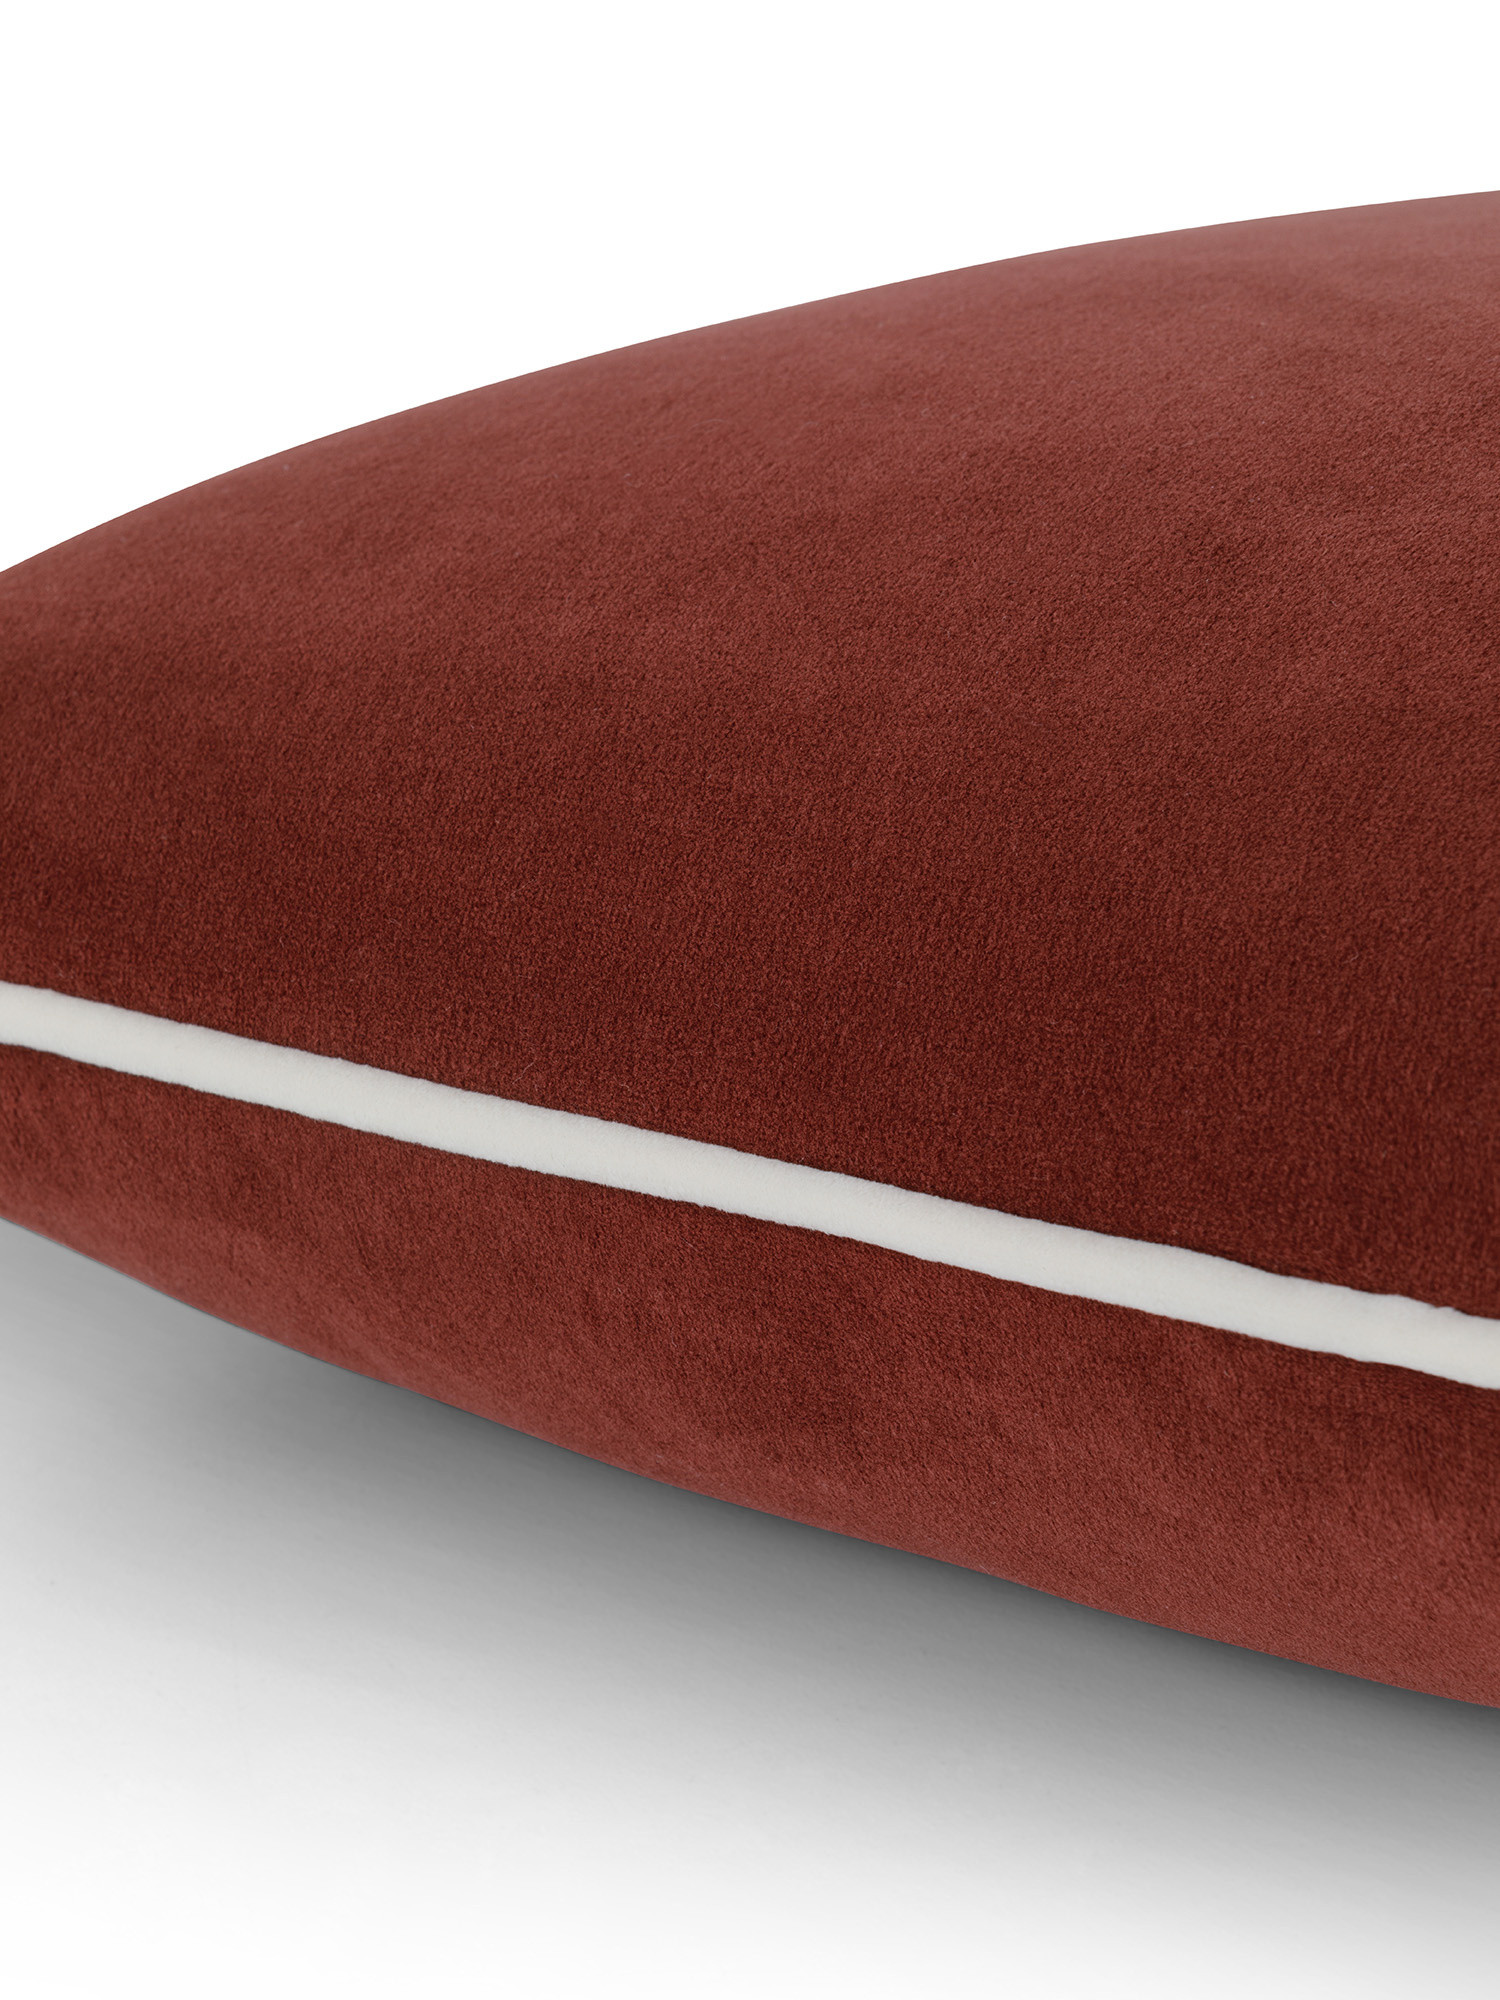 Velvet cushion with piping applied on the edge 45x45 cm, Brown, large image number 2